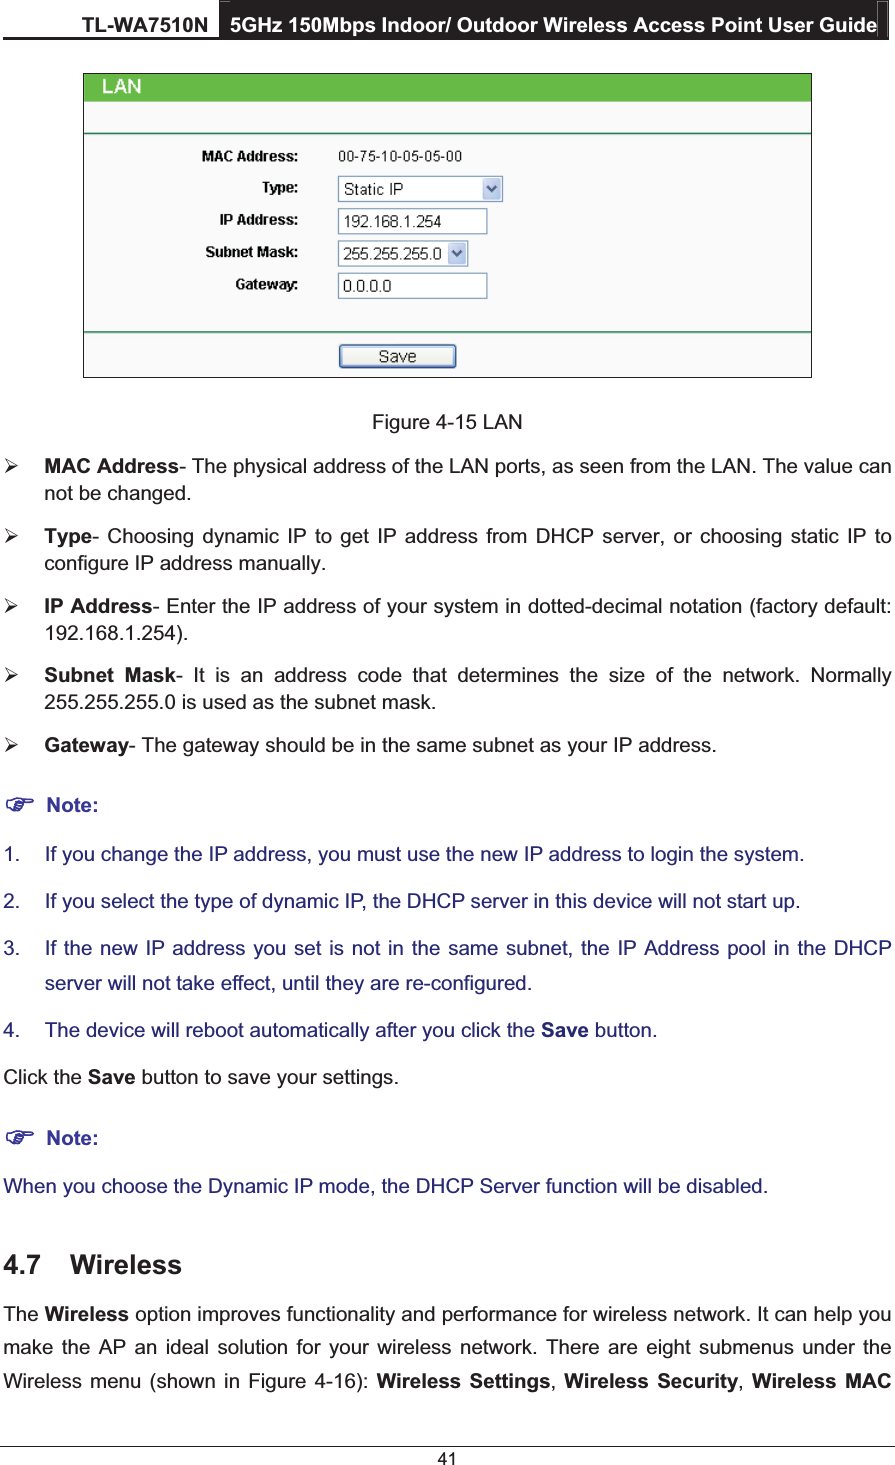 TL-WA7510N 5GHz 150Mbps Indoor/ Outdoor Wireless Access Point User Guide 41  Figure 4-15 LAN ¾ MAC Address- The physical address of the LAN ports, as seen from the LAN. The value can not be changed. ¾ Type- Choosing dynamic IP to get IP address from DHCP server, or choosing static IP to configure IP address manually. ¾ IP Address- Enter the IP address of your system in dotted-decimal notation (factory default: 192.168.1.254). ¾ Subnet Mask- It is an address code that determines the size of the network. Normally 255.255.255.0 is used as the subnet mask. ¾ Gateway- The gateway should be in the same subnet as your IP address. ) Note: 1.  If you change the IP address, you must use the new IP address to login the system. 2.  If you select the type of dynamic IP, the DHCP server in this device will not start up. 3.  If the new IP address you set is not in the same subnet, the IP Address pool in the DHCP server will not take effect, until they are re-configured. 4.  The device will reboot automatically after you click the Save button. Click the Save button to save your settings. ) Note: When you choose the Dynamic IP mode, the DHCP Server function will be disabled. 4.7 Wireless The Wireless option improves functionality and performance for wireless network. It can help you make the AP an ideal solution for your wireless network. There are eight submenus under the Wireless menu (shown in Figure 4-16): Wireless Settings,  Wireless Security, Wireless MAC 